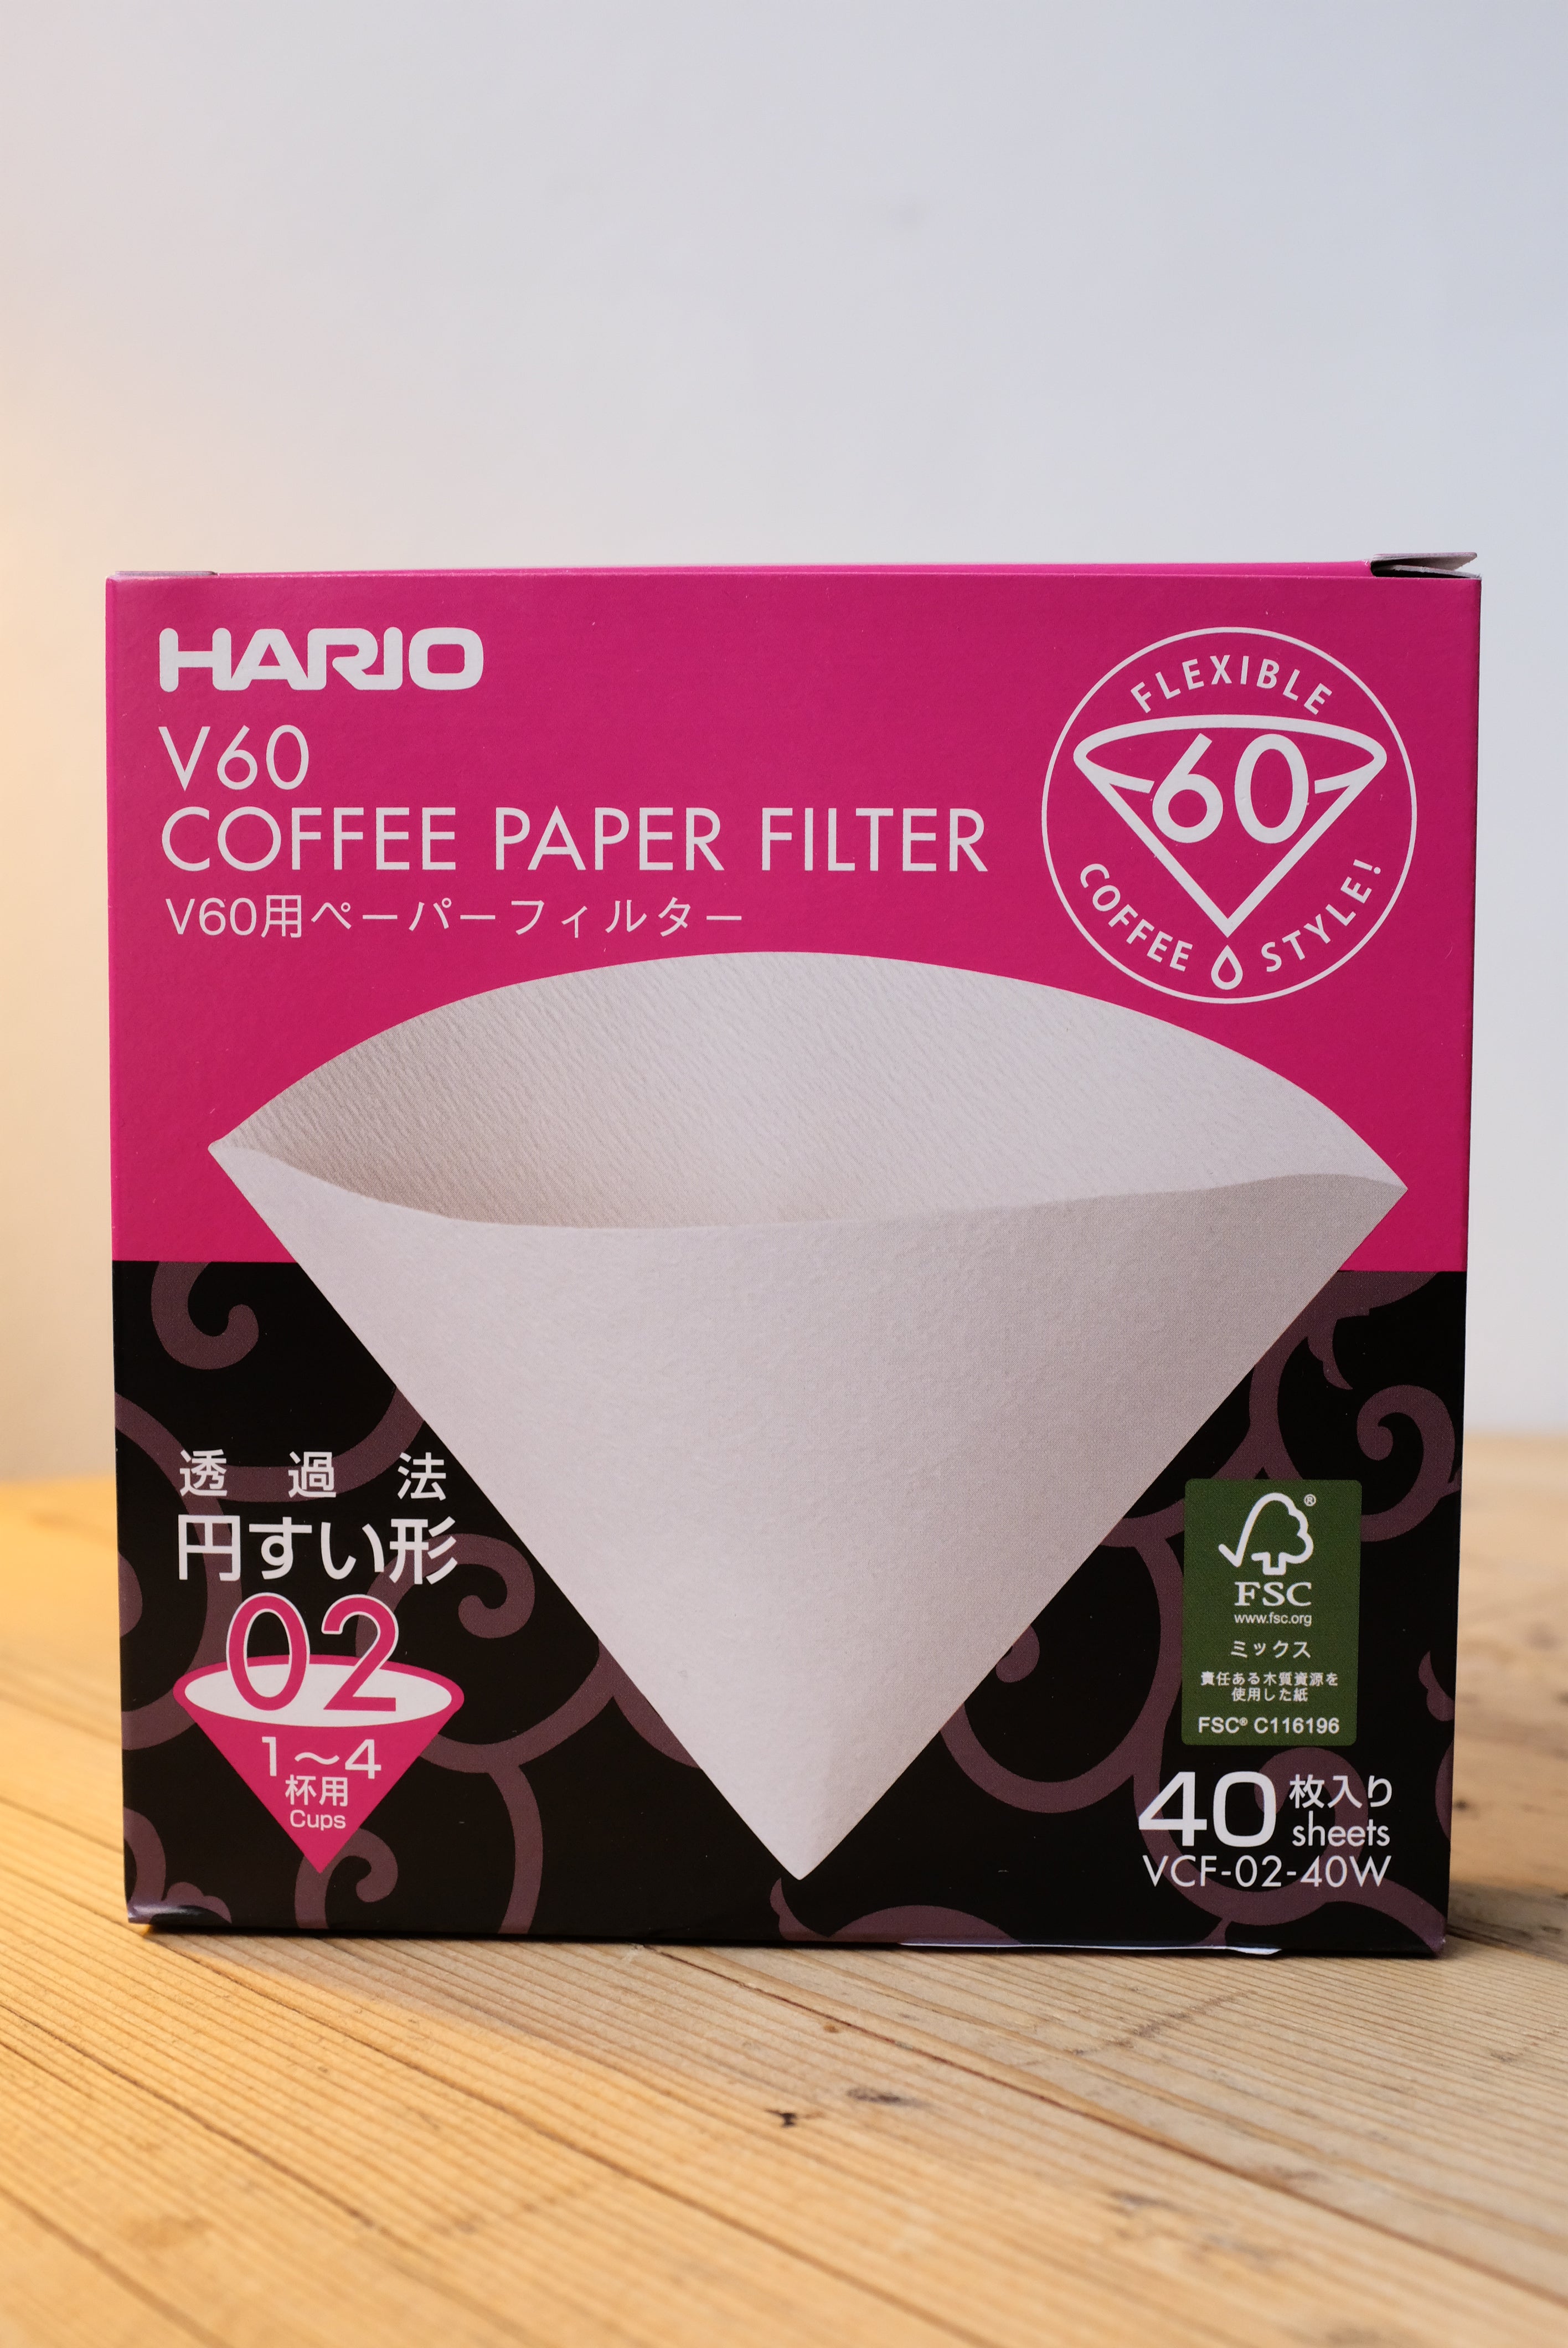 Hario Papierfilter V60 02  40er Packung